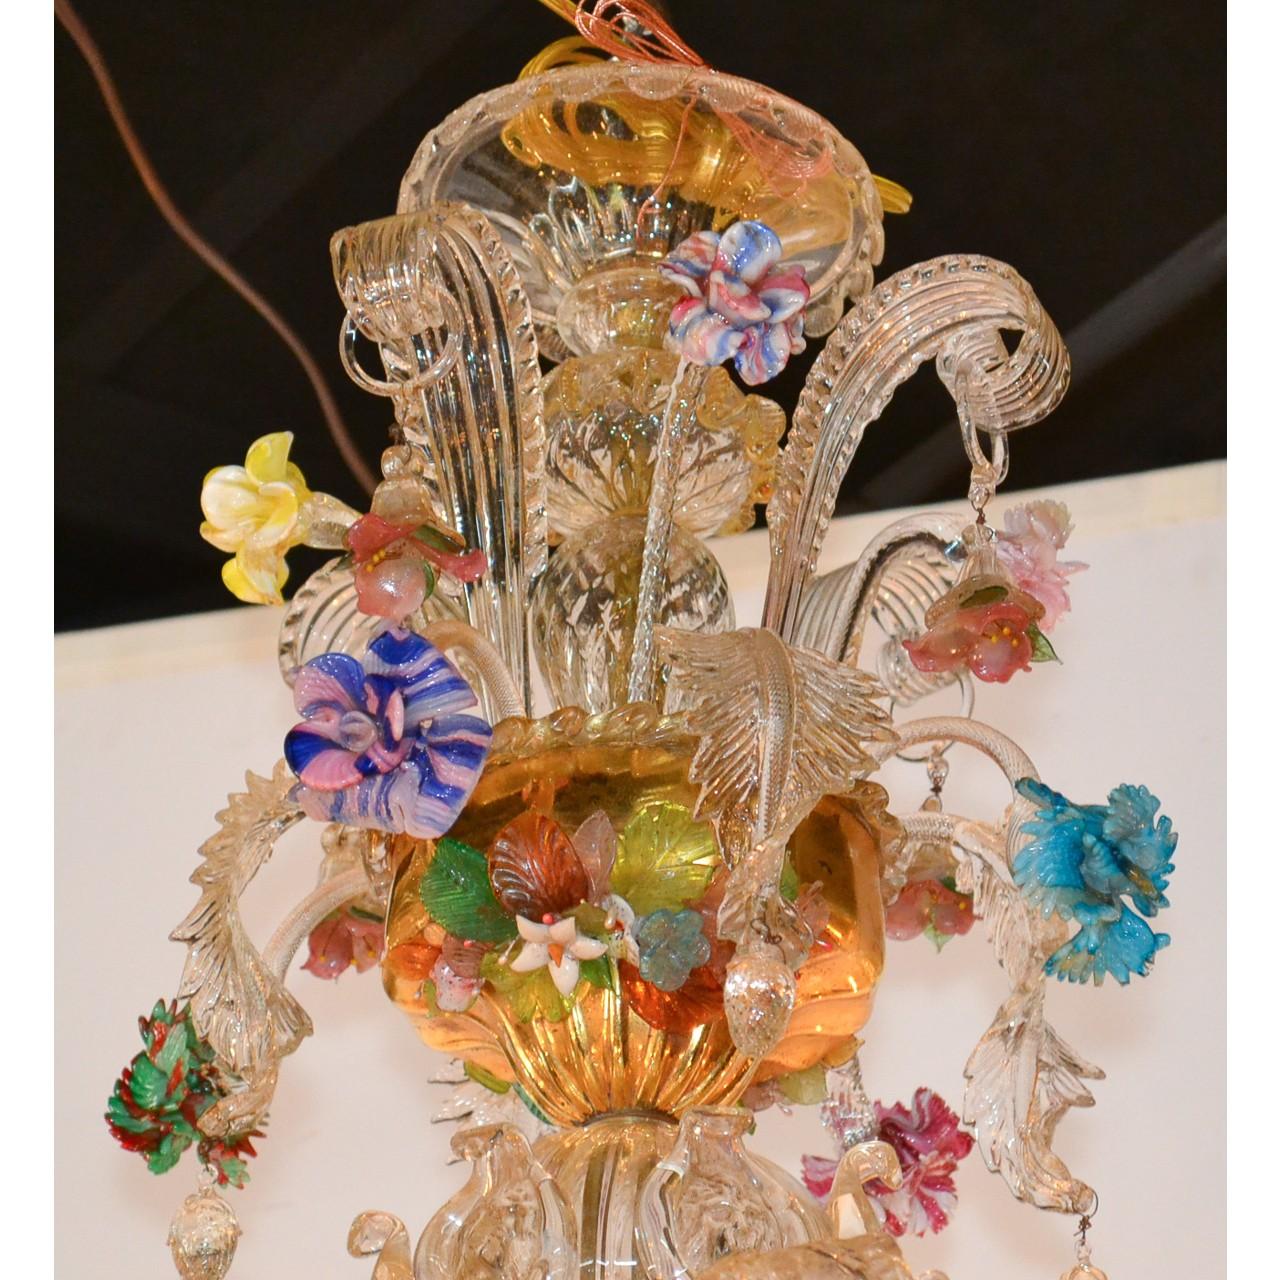 Fabulous antique Venetian blown glass and gilt brass twelve-light chandelier featuring and extraordinary array of colorful flowers and leaves depicted in relief. The shaped stem with large leaf sprays above beautifully contoured arms with fluted